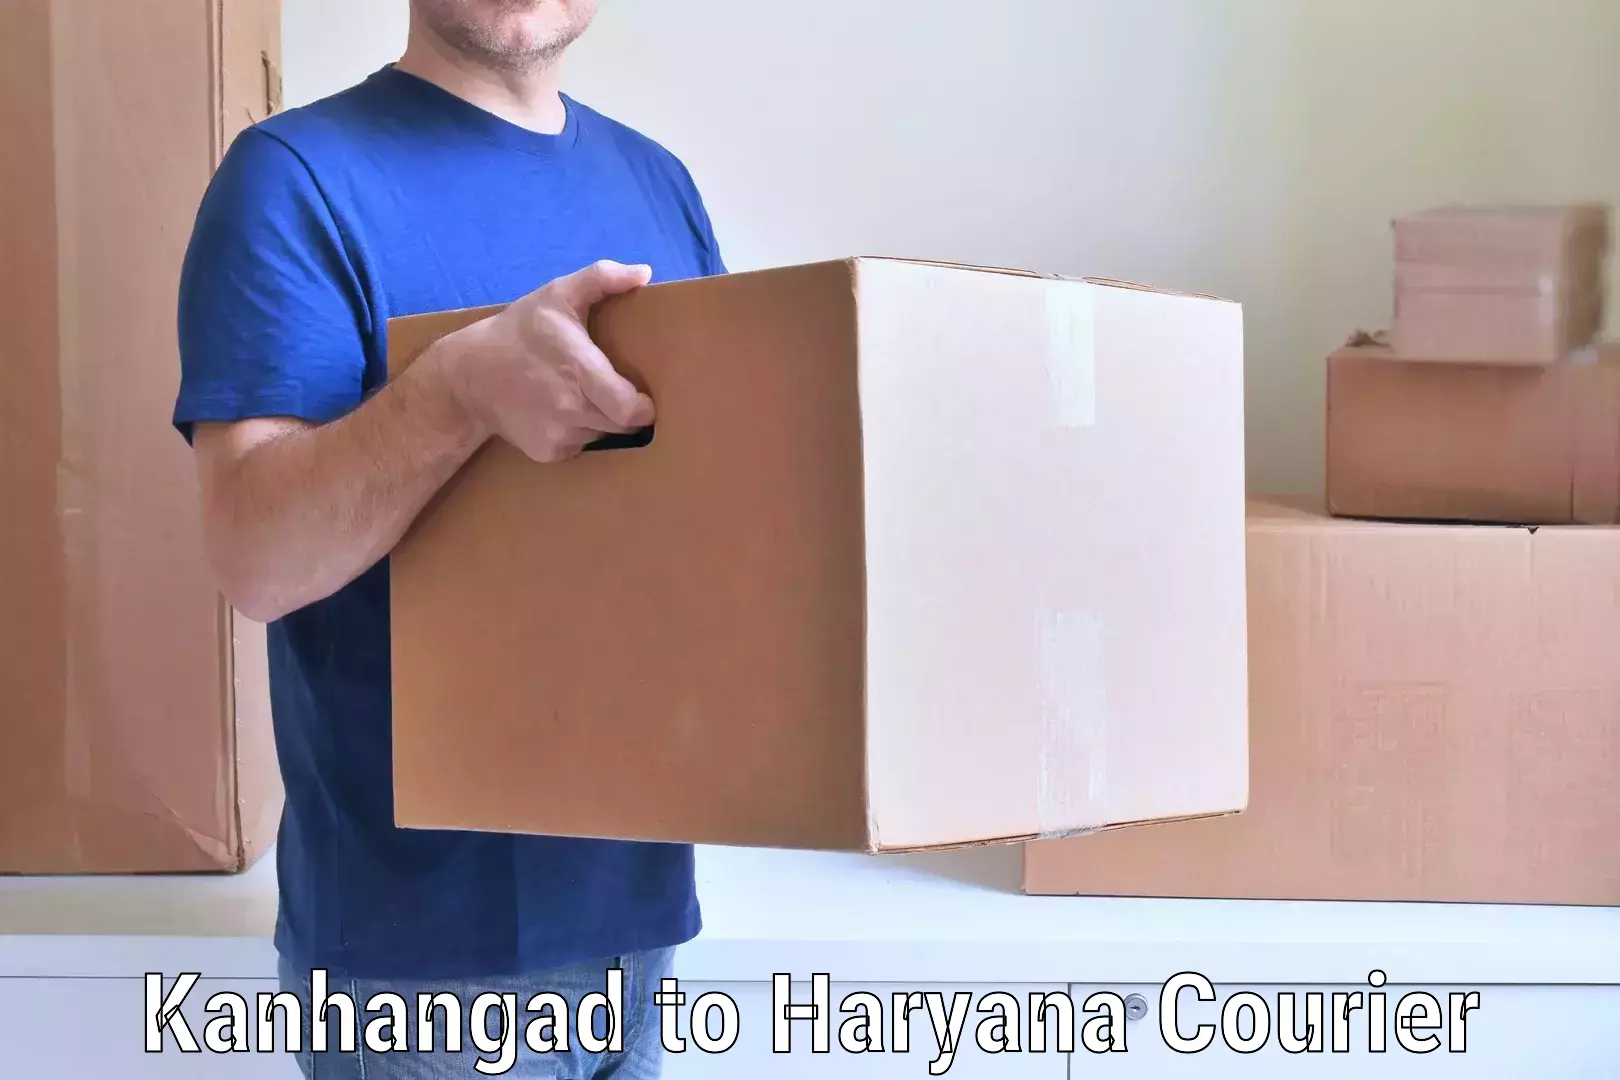 Trusted relocation experts Kanhangad to Haryana